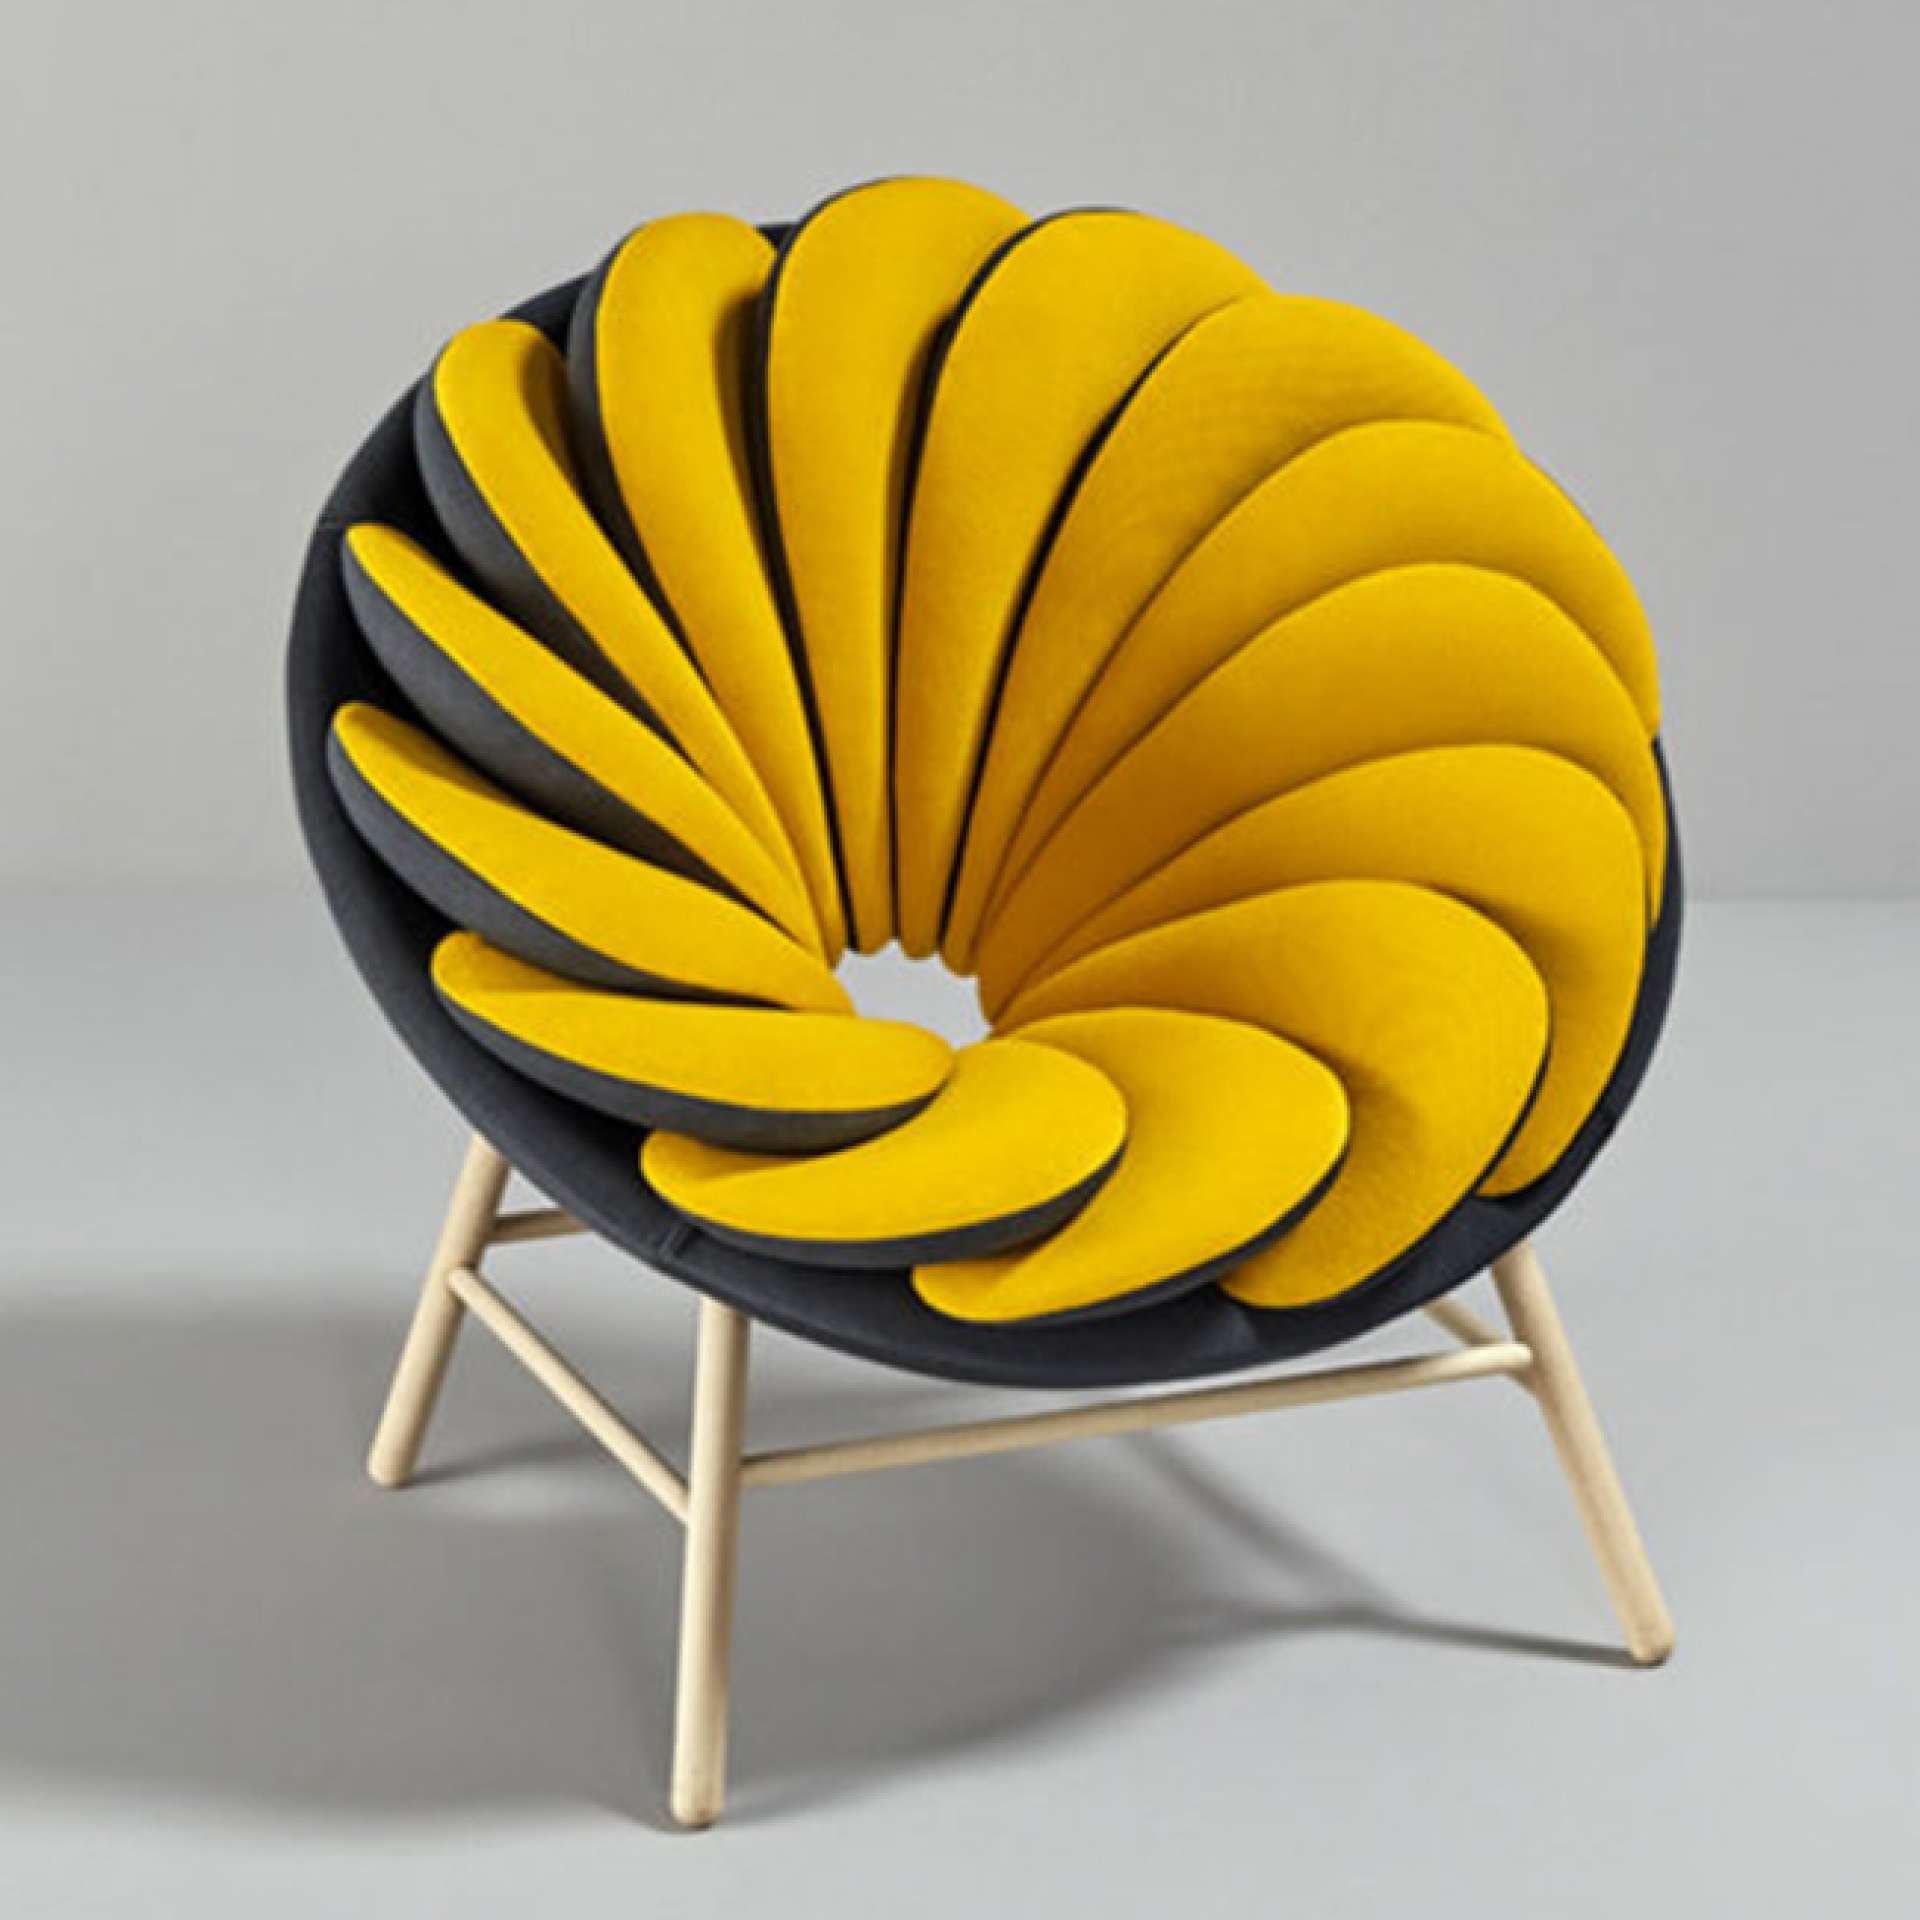 A chair inspired by feathers: Quetzal by Marc Venot